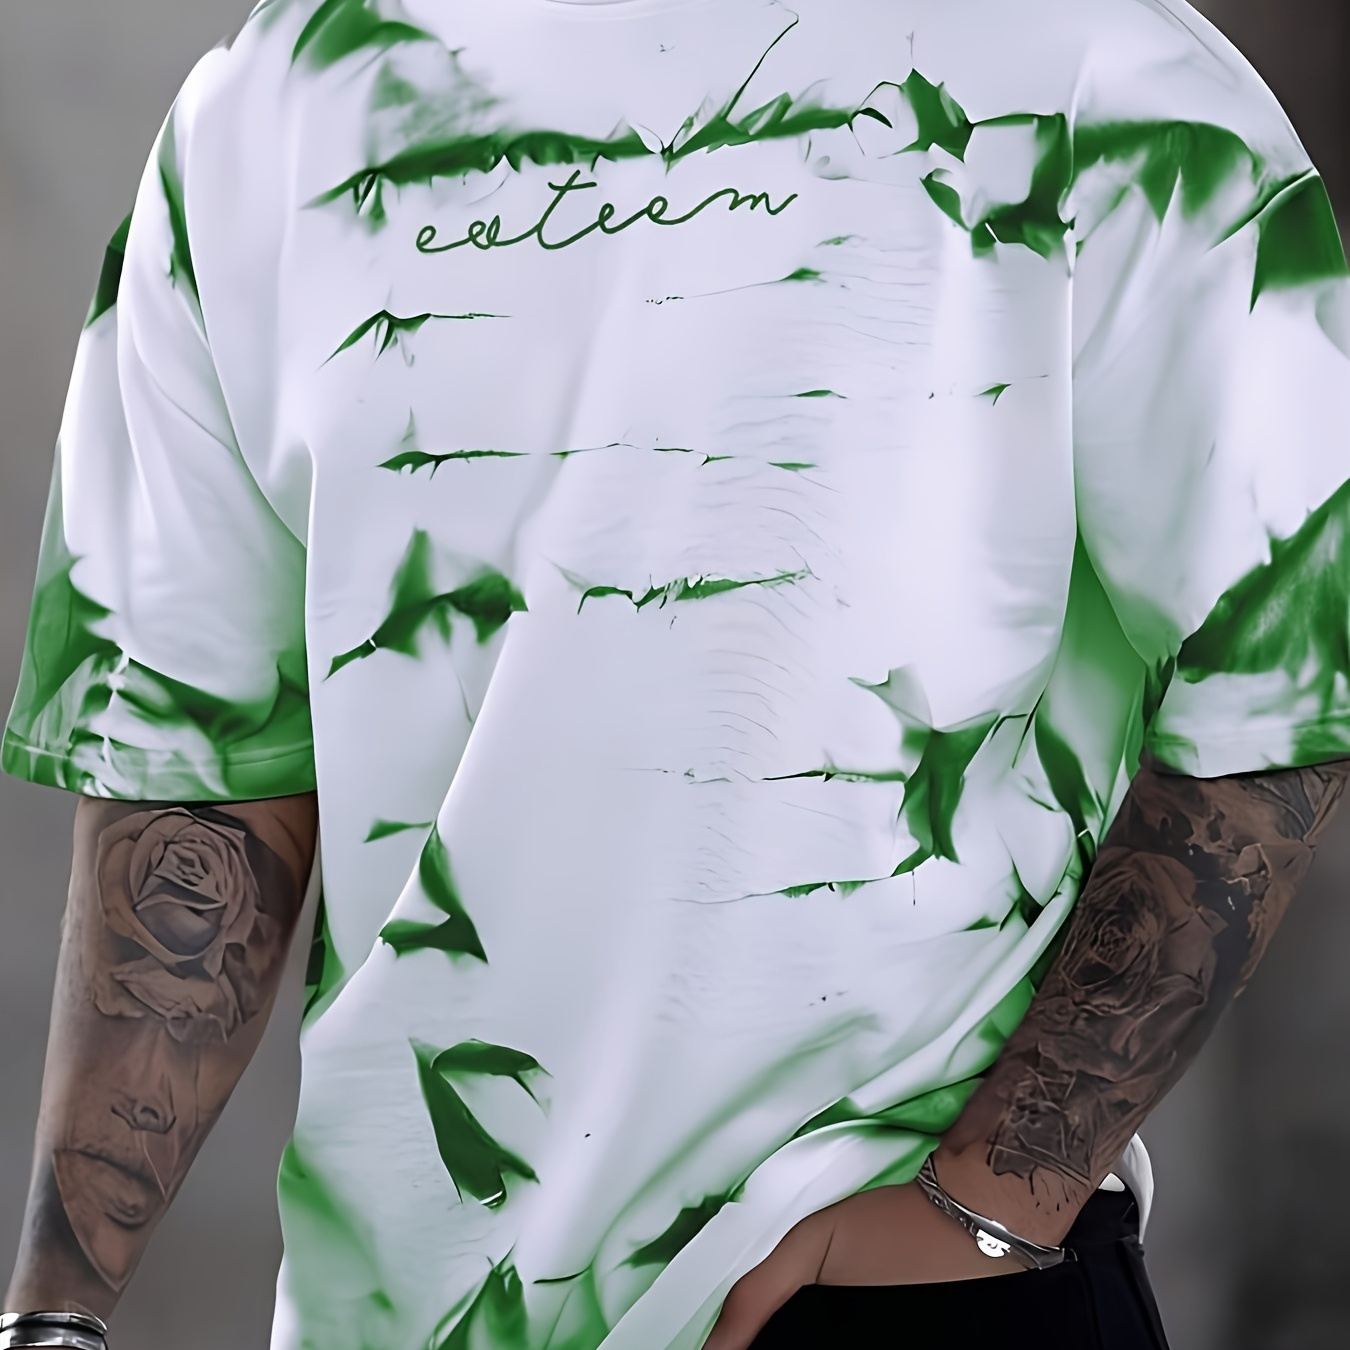 

Green Paint Mark Pattern And Alphabet Print T-shirt With Crew Neck And Short Sleeve, Casual And Stylish Tops For Men's Summer Outdoors Daily Wear